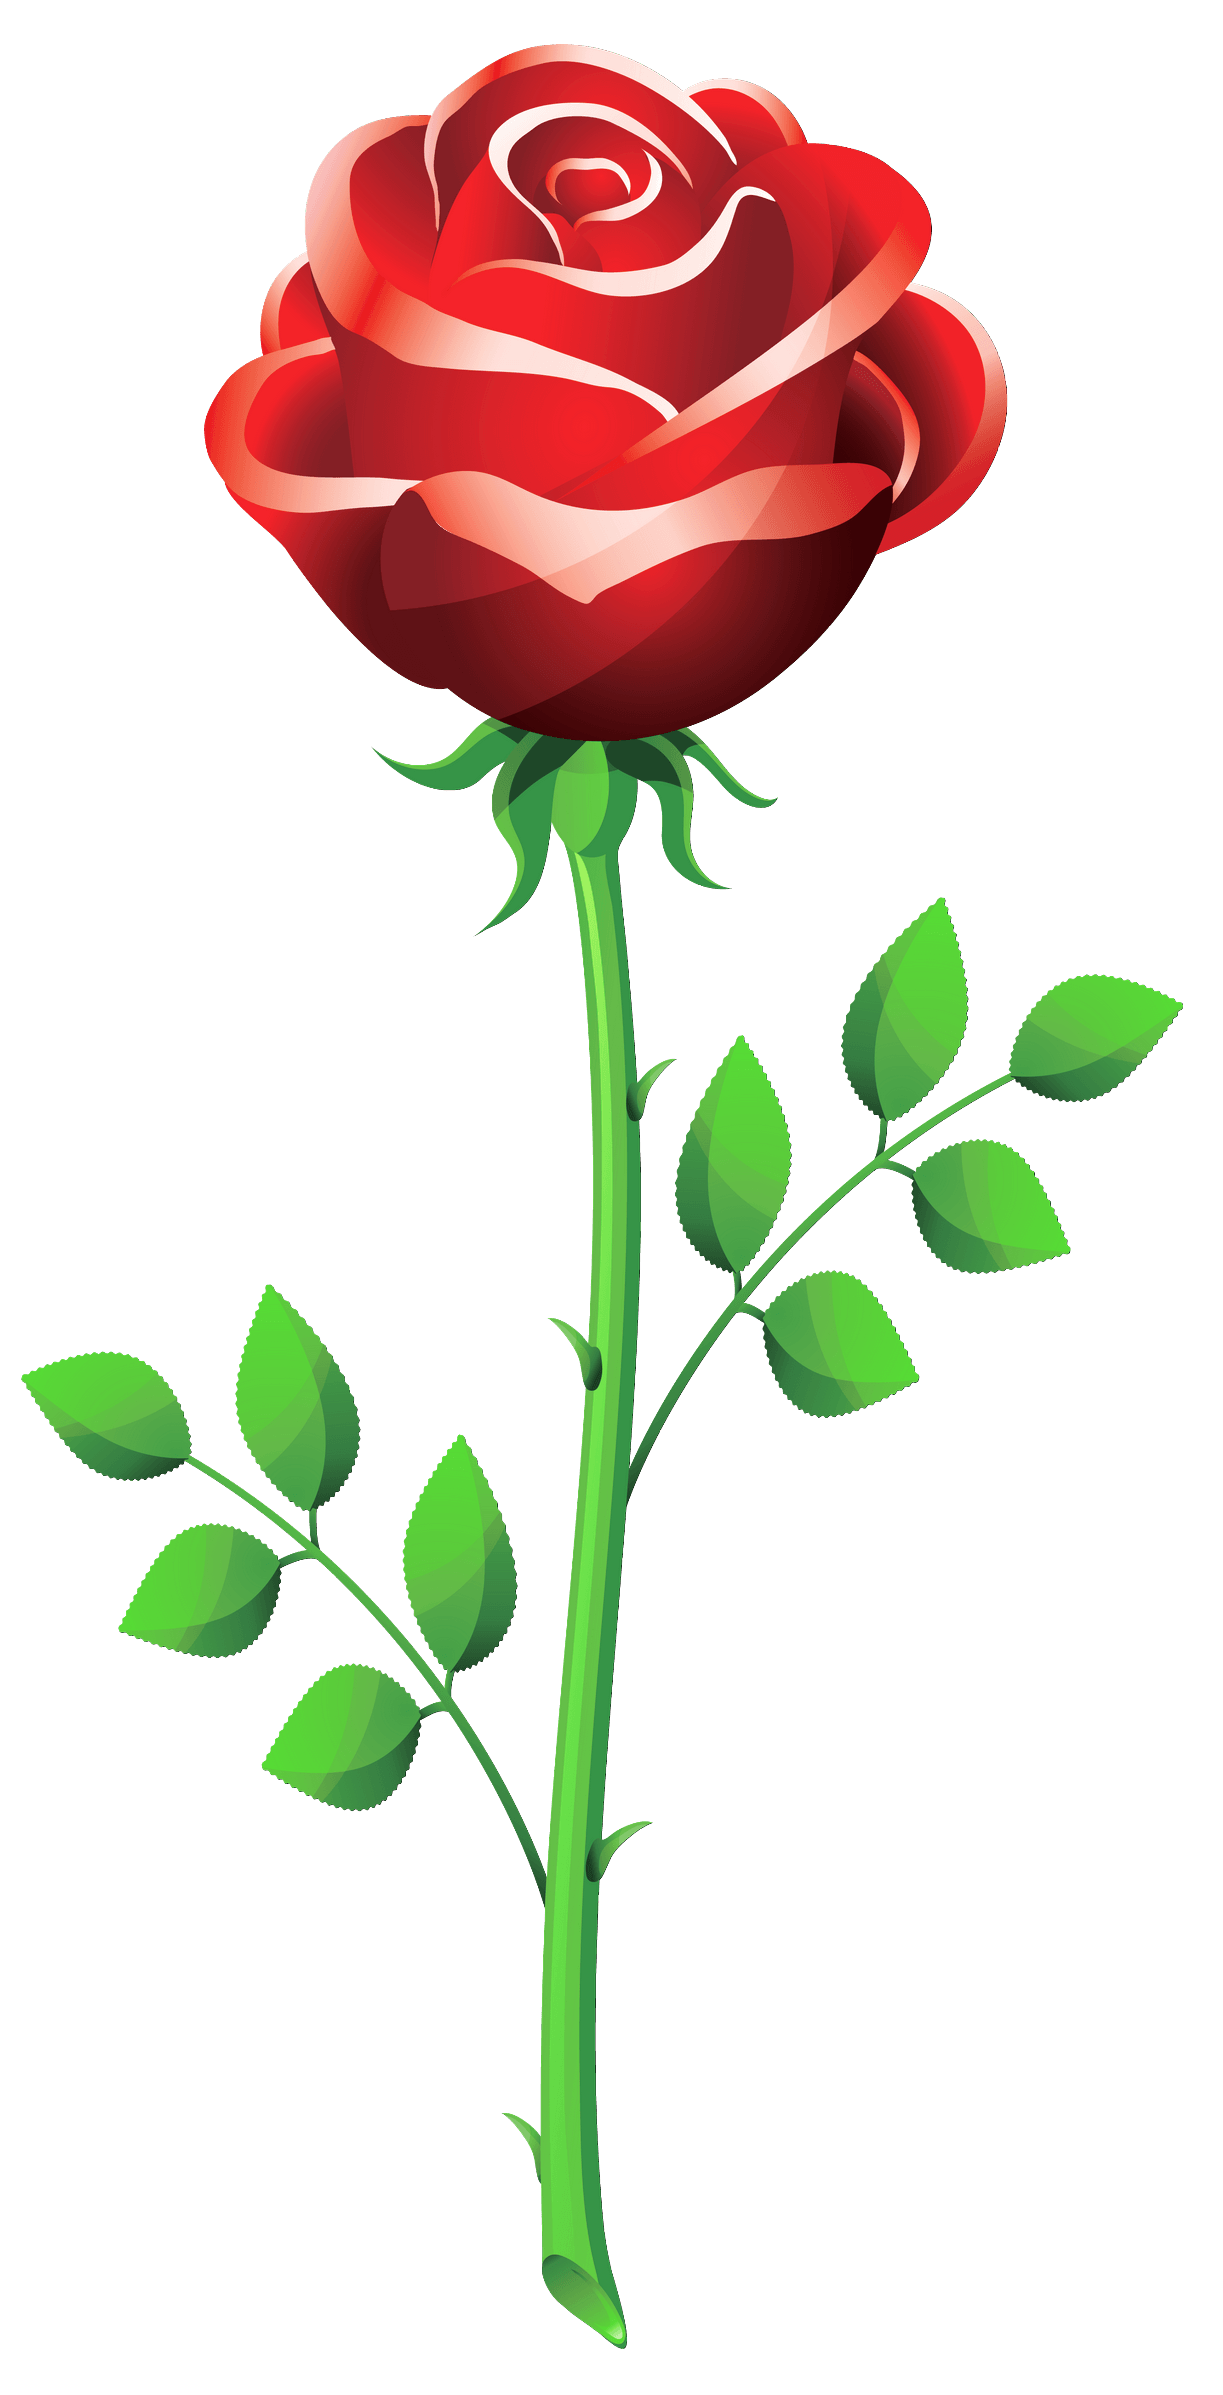 Red Valentine Roses Clip Art � Clipart Free Download